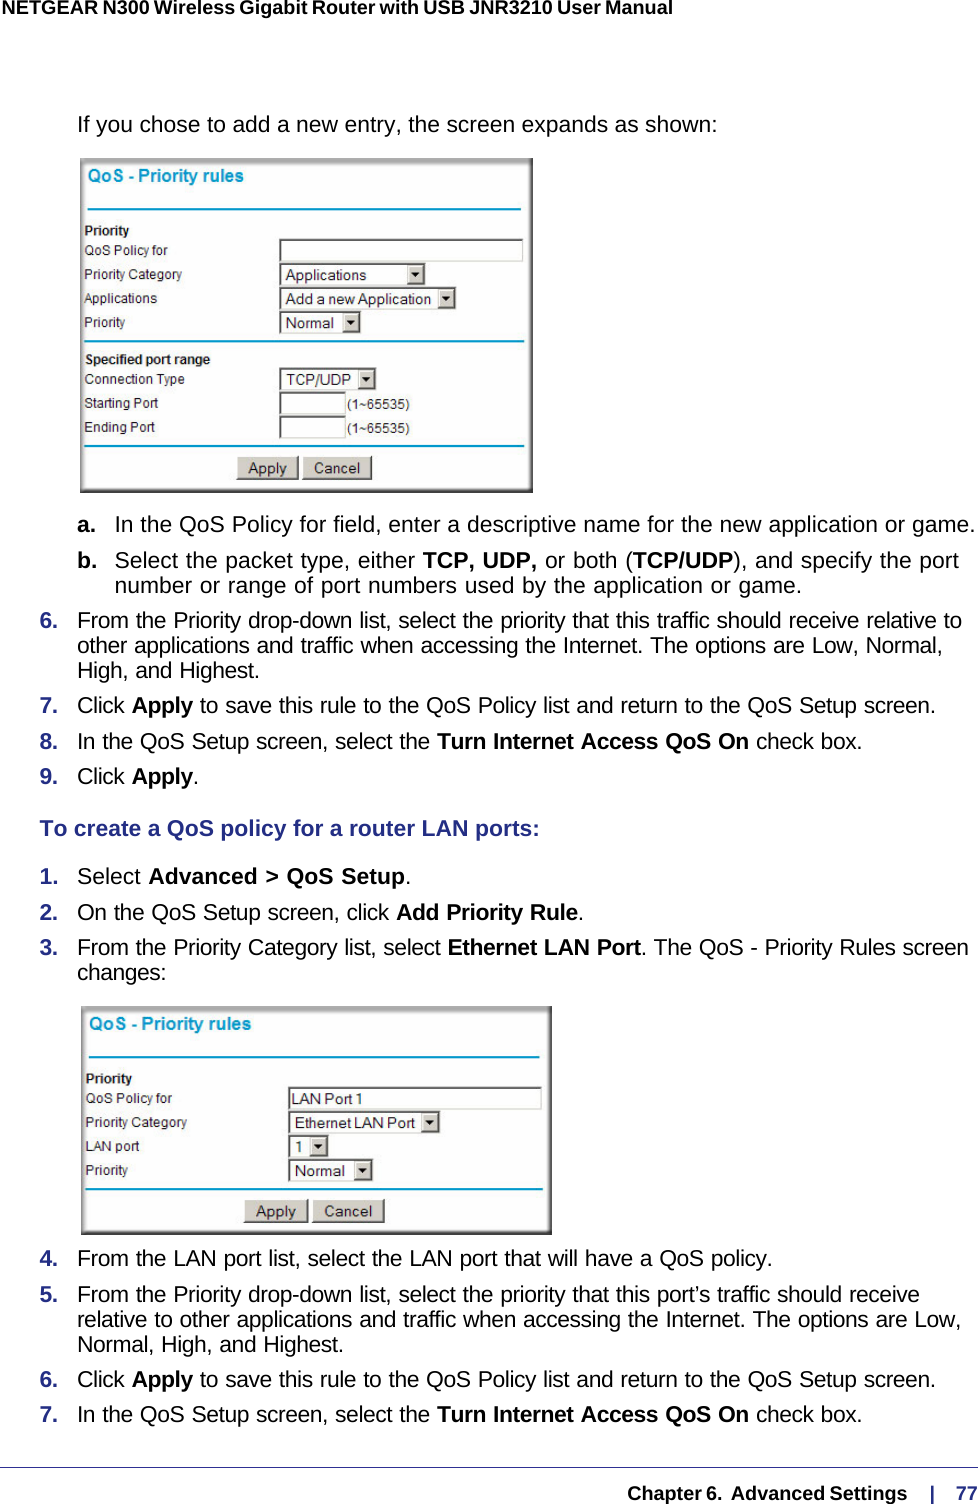   Chapter 6.  Advanced Settings     |    77NETGEAR N300 Wireless Gigabit Router with USB JNR3210 User Manual If you chose to add a new entry, the screen expands as shown:a.  In the QoS Policy for field, enter a descriptive name for the new application or game.b.  Select the packet type, either TCP, UDP, or both (TCP/UDP), and specify the port number or range of port numbers used by the application or game.6.  From the Priority drop-down list, select the priority that this traffic should receive relative to other applications and traffic when accessing the Internet. The options are Low, Normal, High, and Highest.7.  Click Apply to save this rule to the QoS Policy list and return to the QoS Setup screen.8.  In the QoS Setup screen, select the Turn Internet Access QoS On check box.9.  Click Apply.To create a QoS policy for a router LAN ports:1.  Select Advanced &gt; QoS Setup. 2.  On the QoS Setup screen, click Add Priority Rule. 3.  From the Priority Category list, select Ethernet LAN Port. The QoS - Priority Rules screen changes:4.  From the LAN port list, select the LAN port that will have a QoS policy.5.  From the Priority drop-down list, select the priority that this port’s traffic should receive relative to other applications and traffic when accessing the Internet. The options are Low, Normal, High, and Highest.6.  Click Apply to save this rule to the QoS Policy list and return to the QoS Setup screen.7.  In the QoS Setup screen, select the Turn Internet Access QoS On check box.